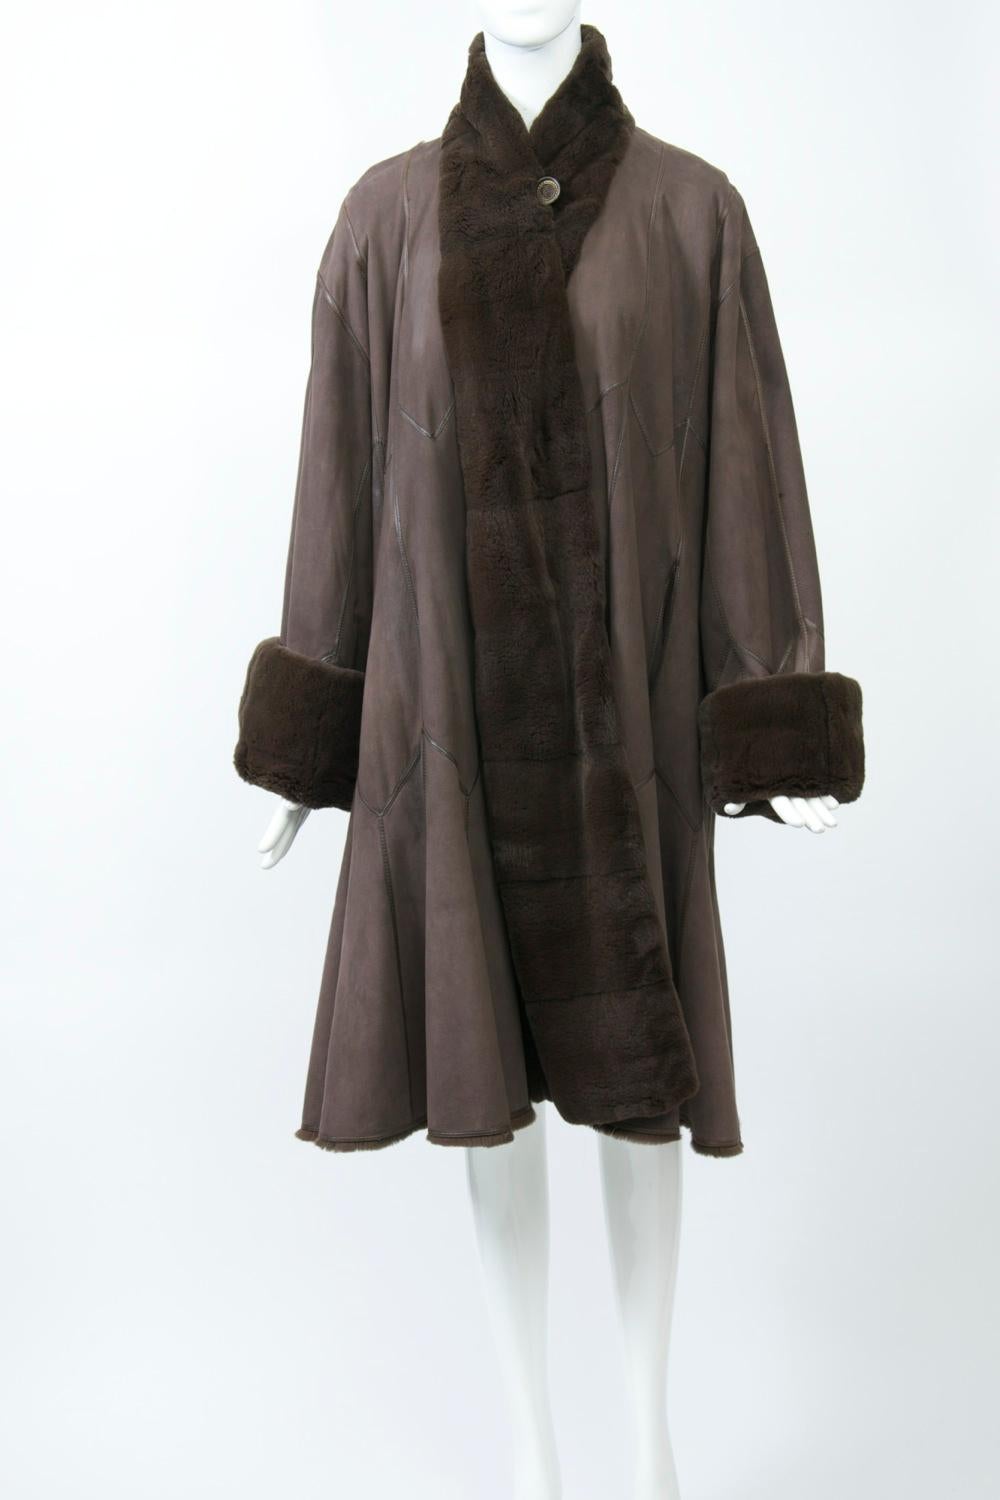 Reversible sheared mink coat in brown by Giuliana Teso, whose firm was founded in 1980 and has since been known for its high-quality furs and interesting designs. This swing coat, designed for Bergdorf Goodman, has a grand sweep of fur and can be